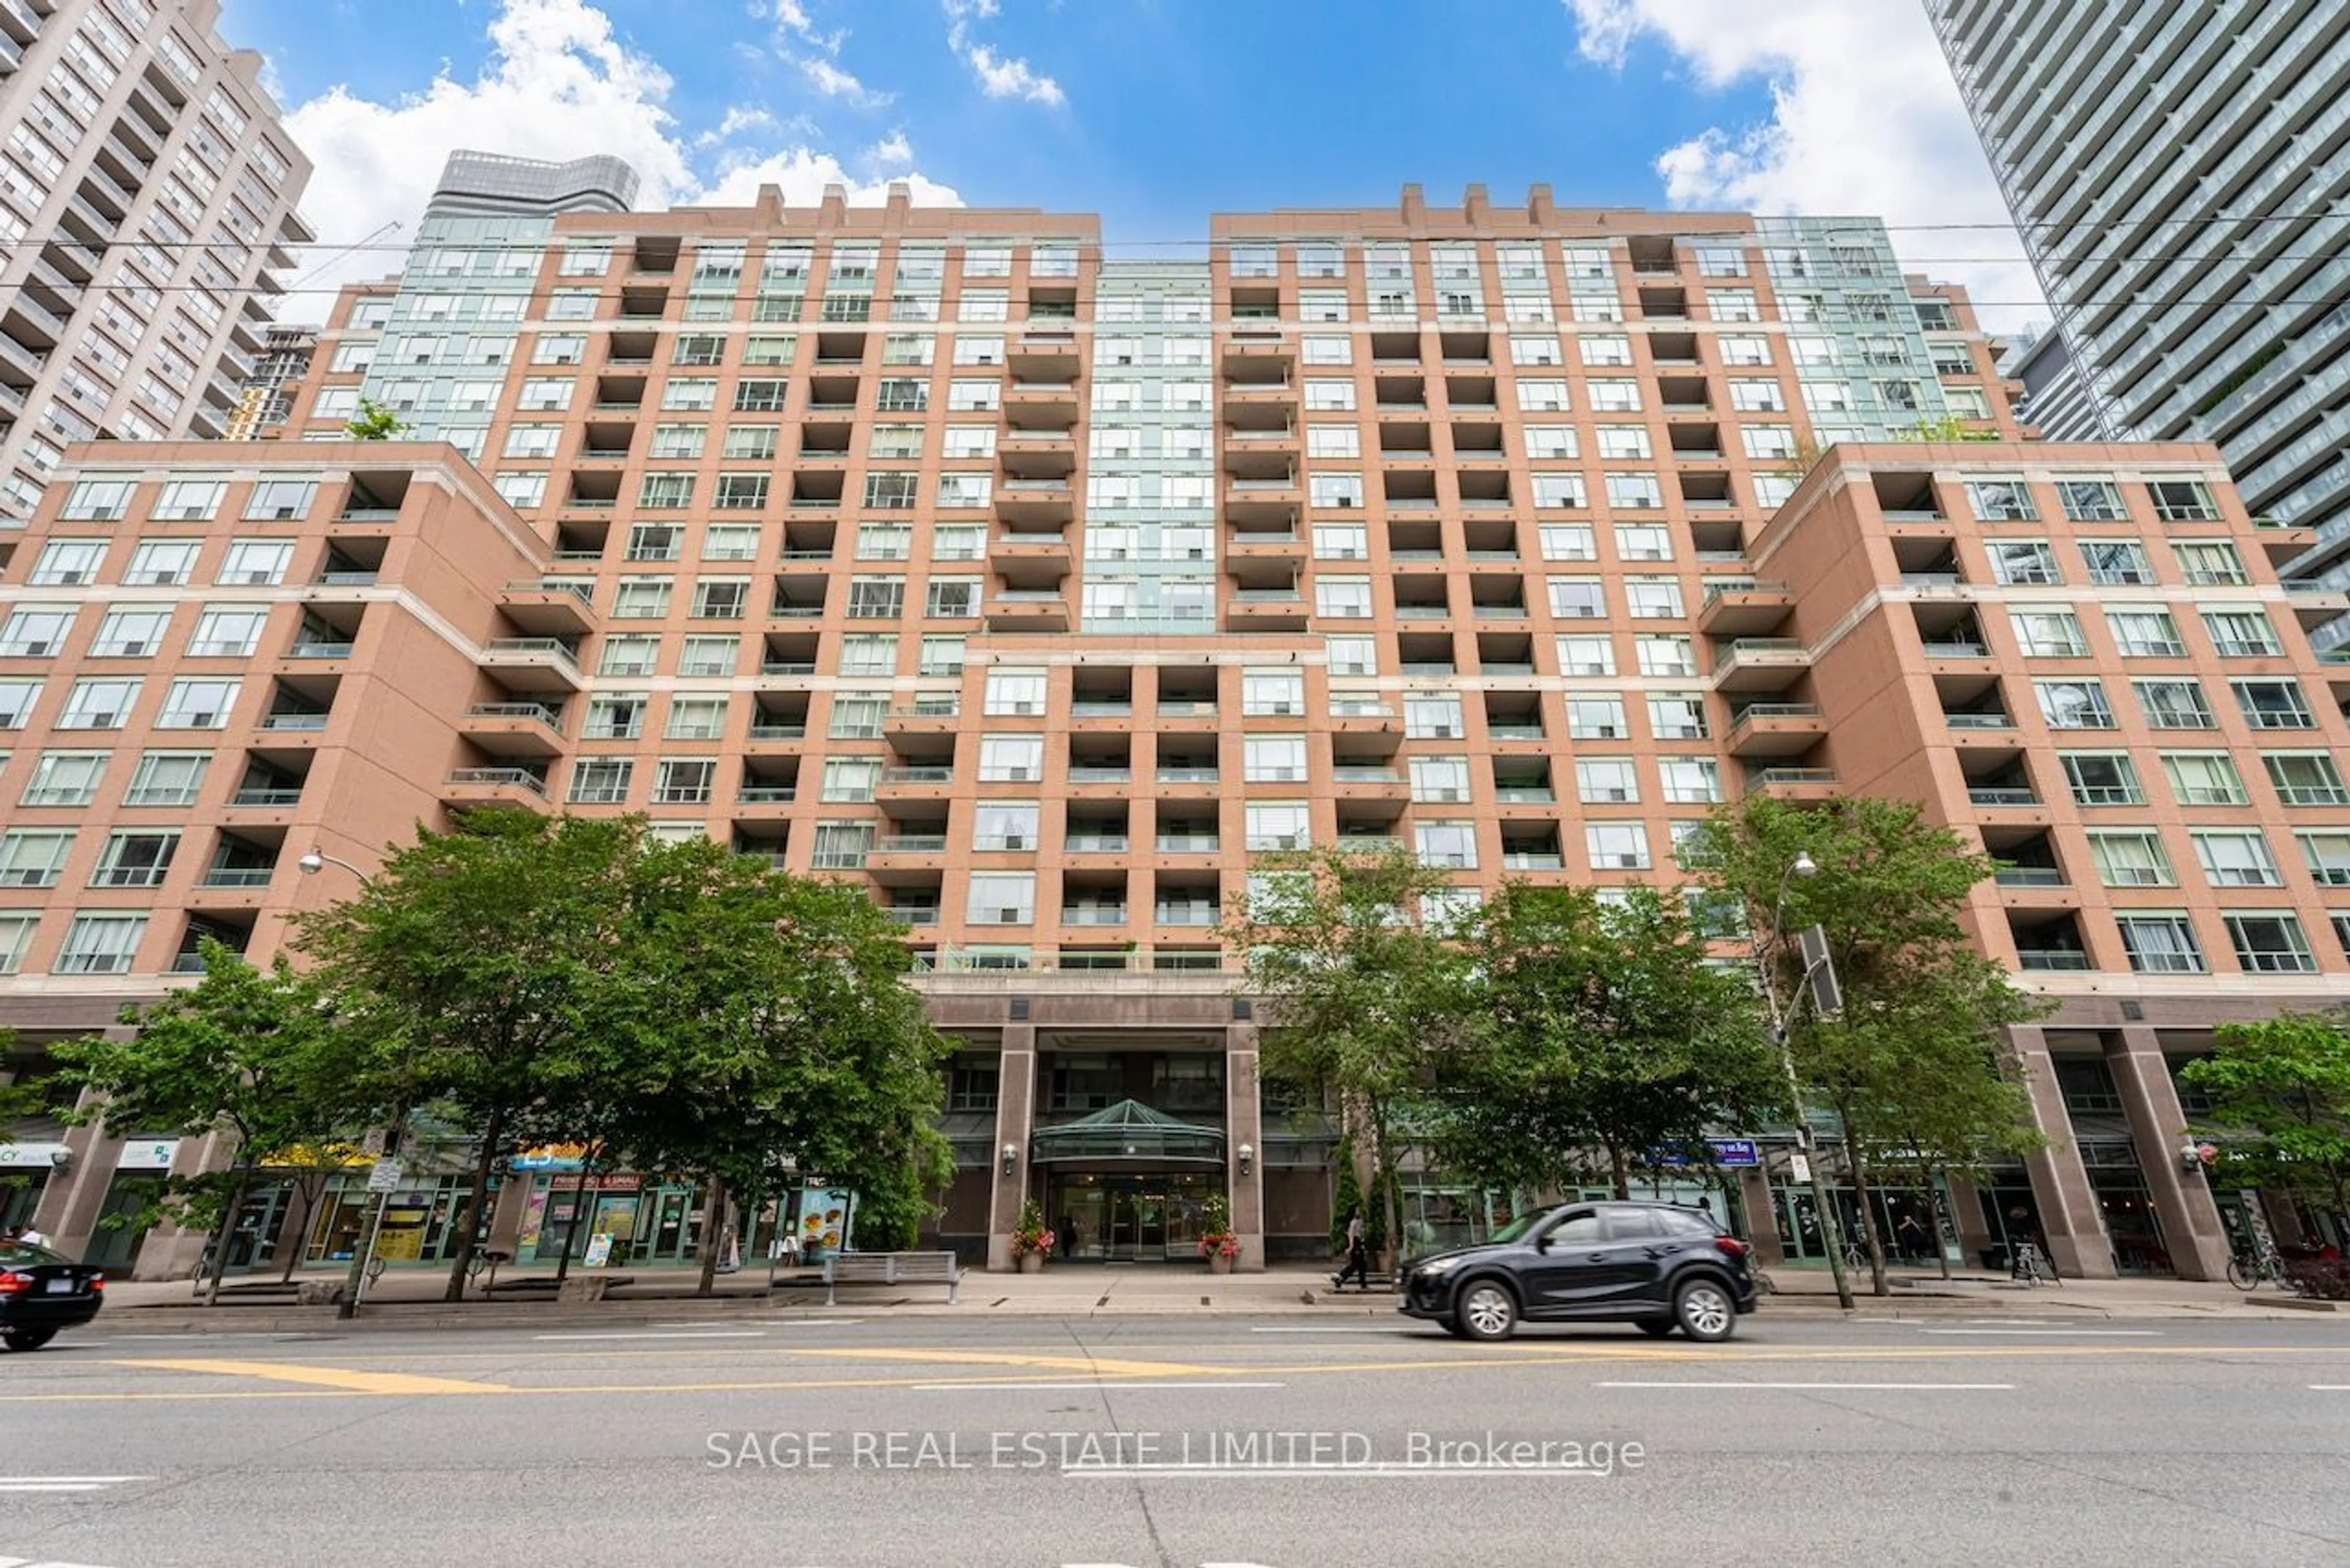 A pic from exterior of the house or condo for 889 Bay St #1612, Toronto Ontario M5S 3K5